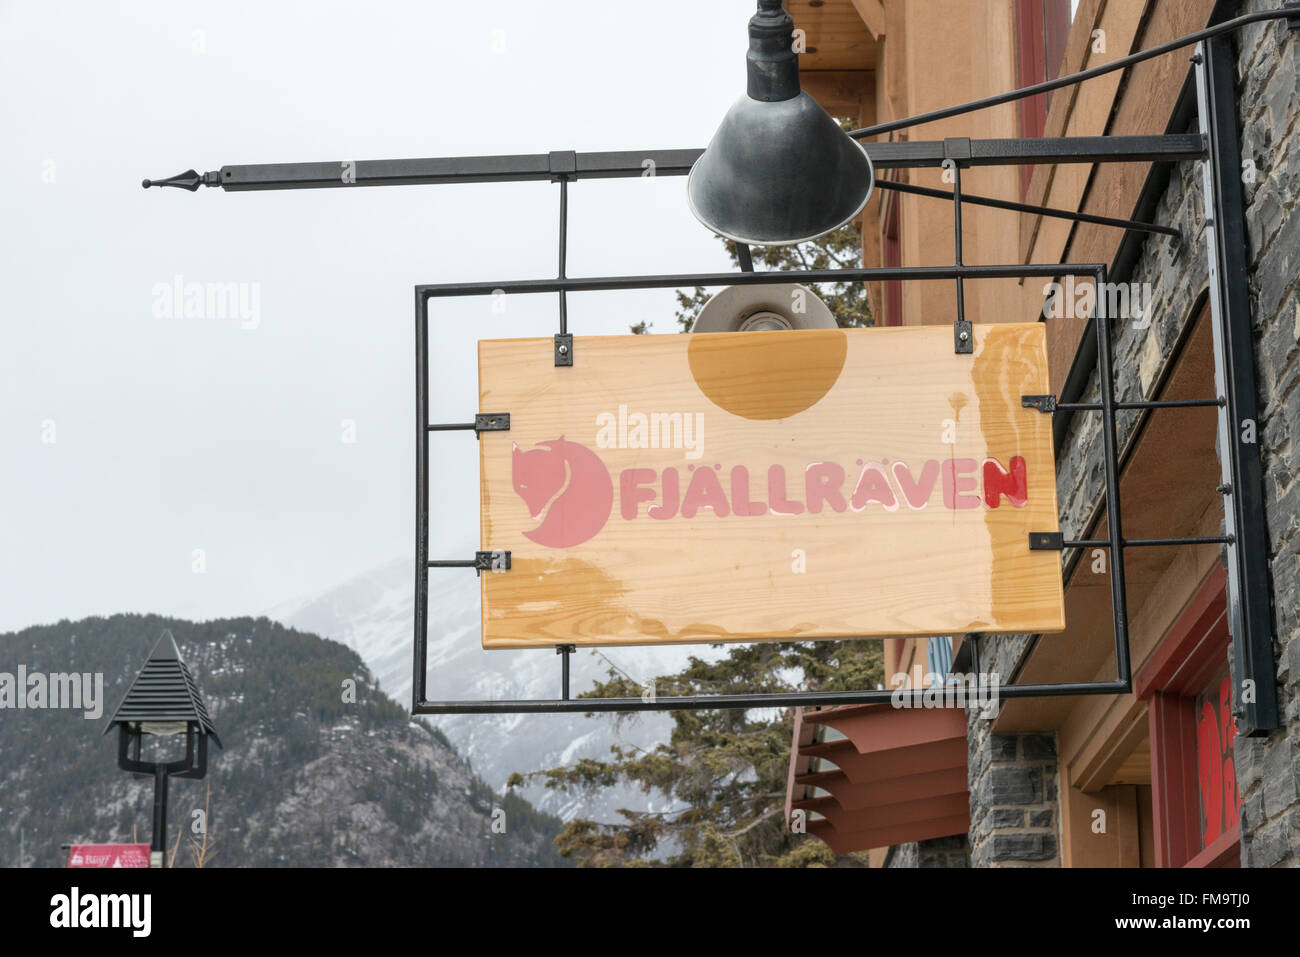 The sign for the Fjallraven clothing shop or store at Banff Canada Stock Photo